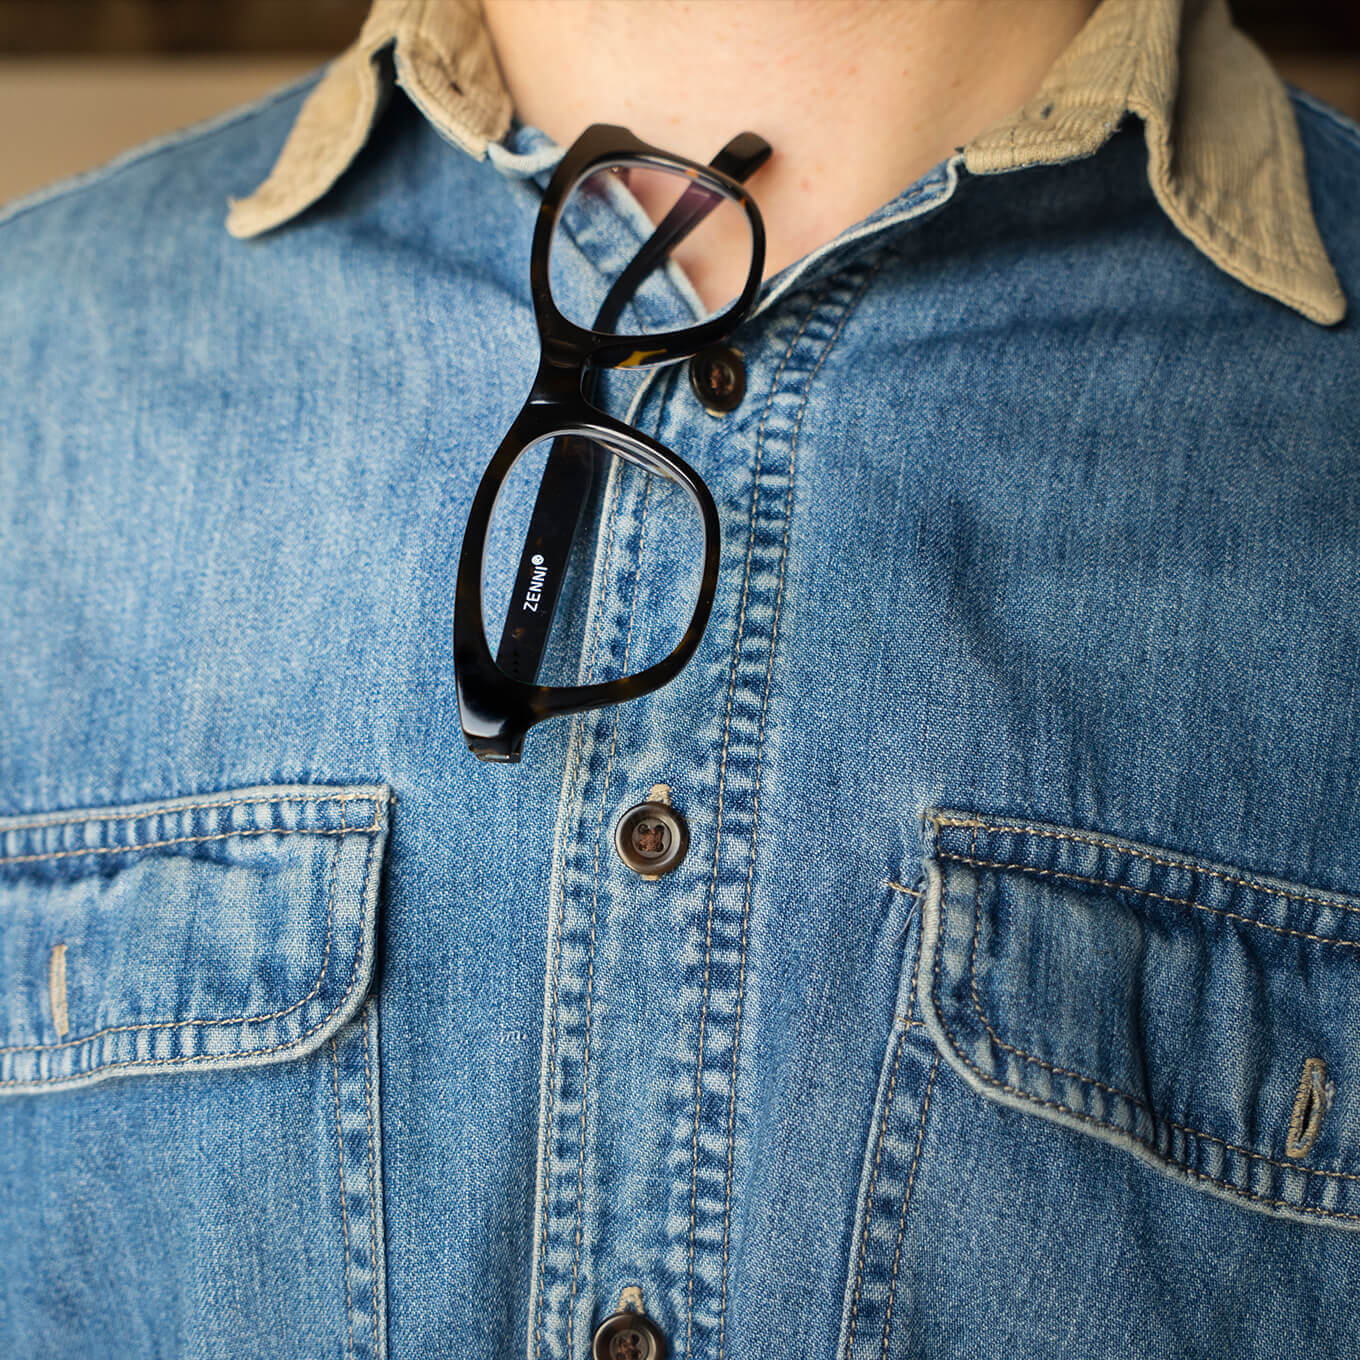 Black Maybeck eyeglasses from the Zenni Metropolitan Collection hanging from neck of chambray shirt.